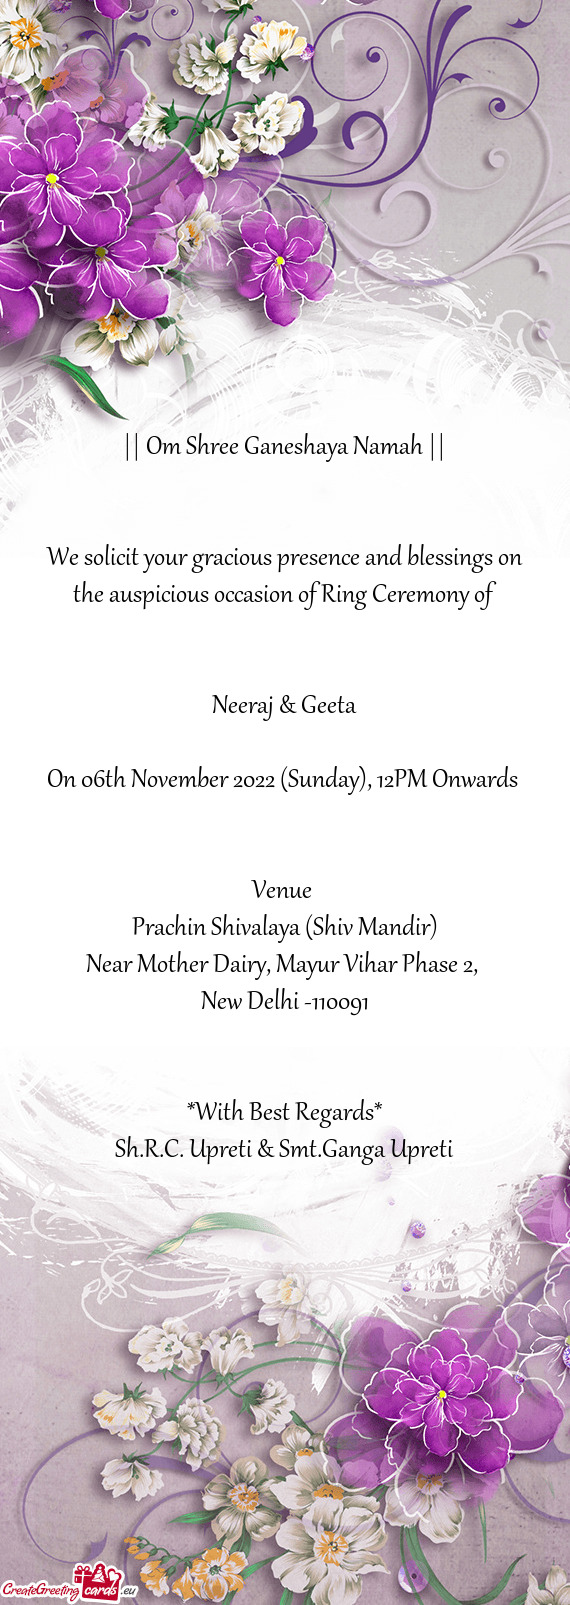 We solicit your gracious presence and blessings on the auspicious occasion of Ring Ceremony of